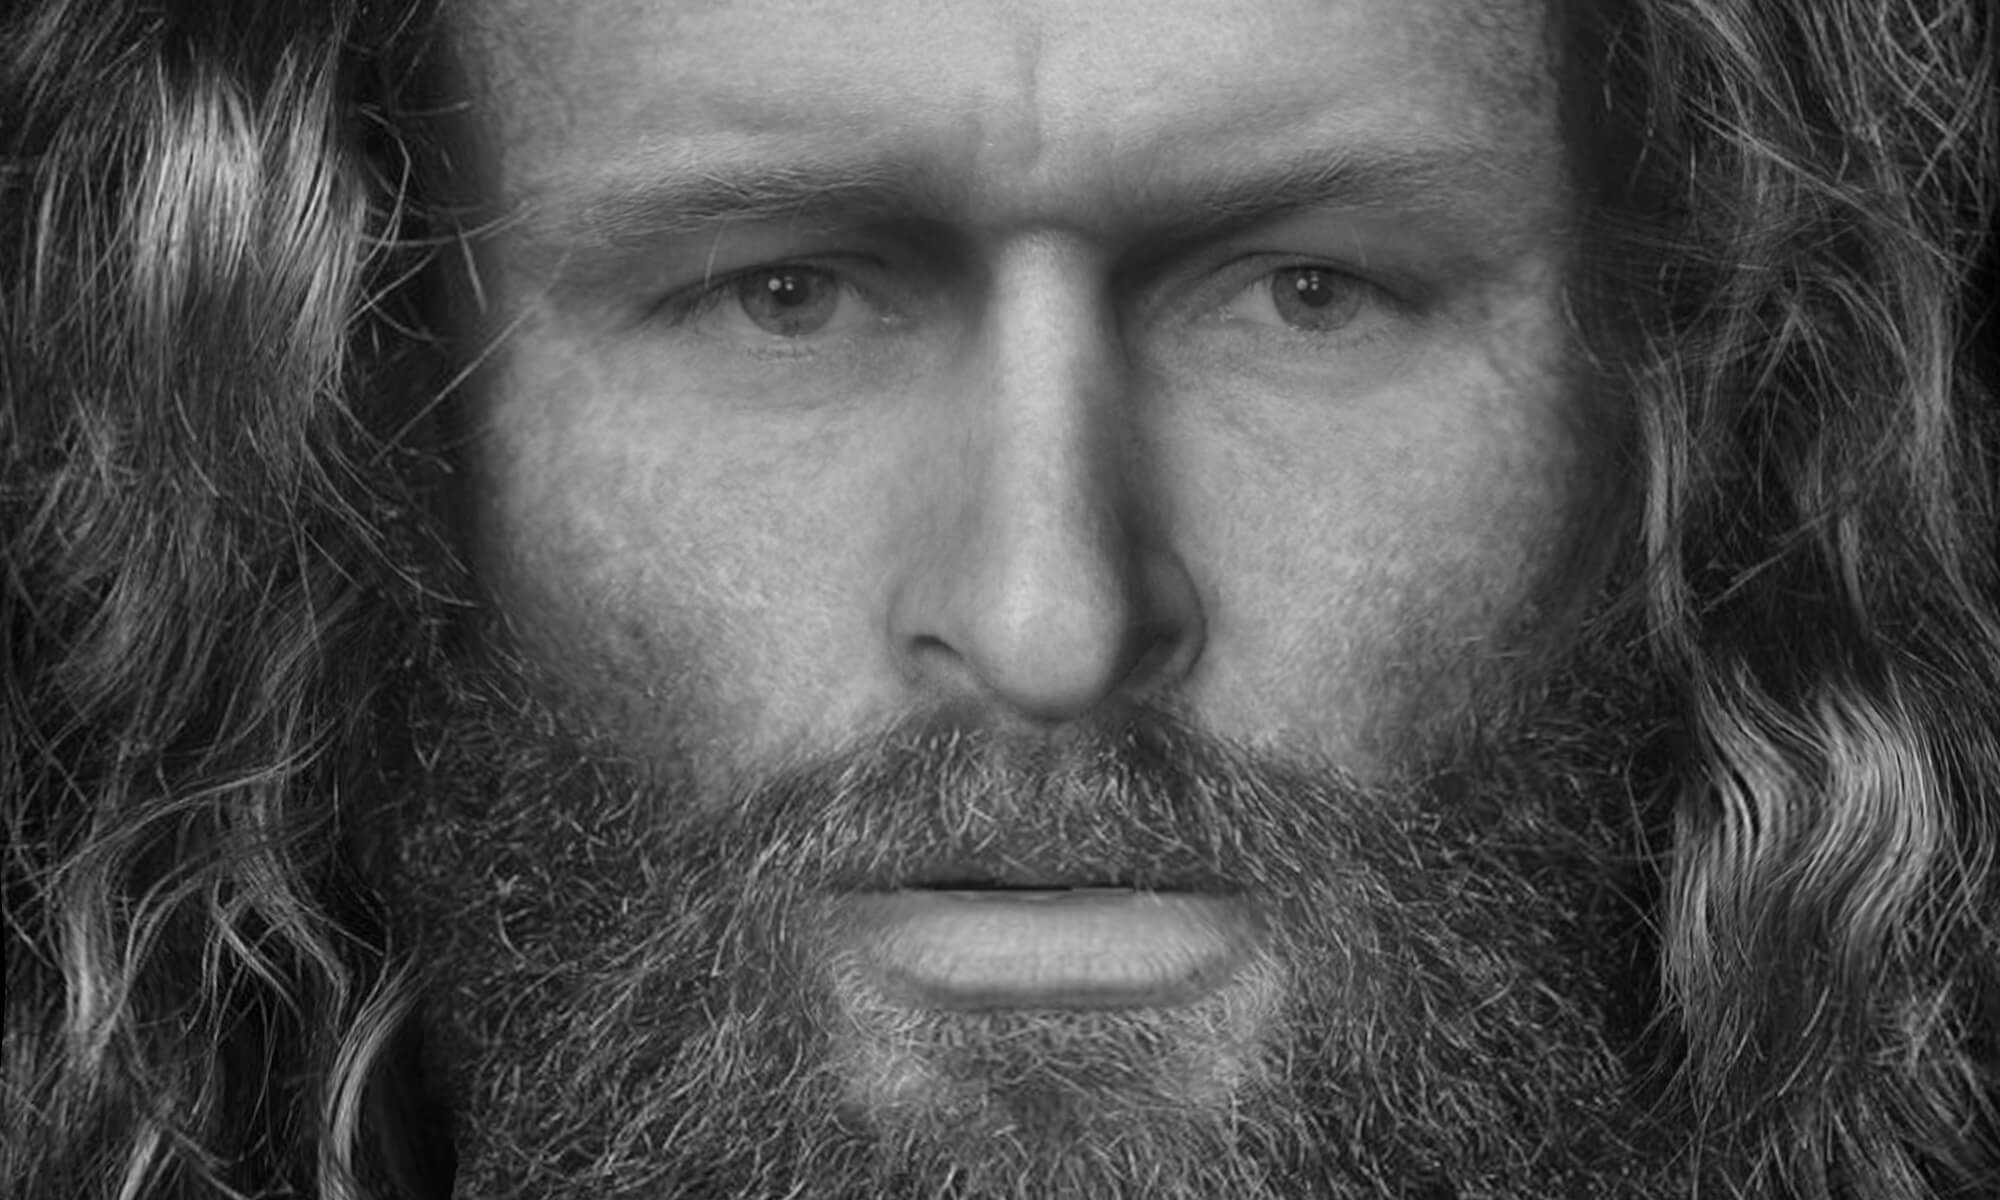 Scientists have reconstructed the identity of the murdered 1400 years ago human. Guess who he was?